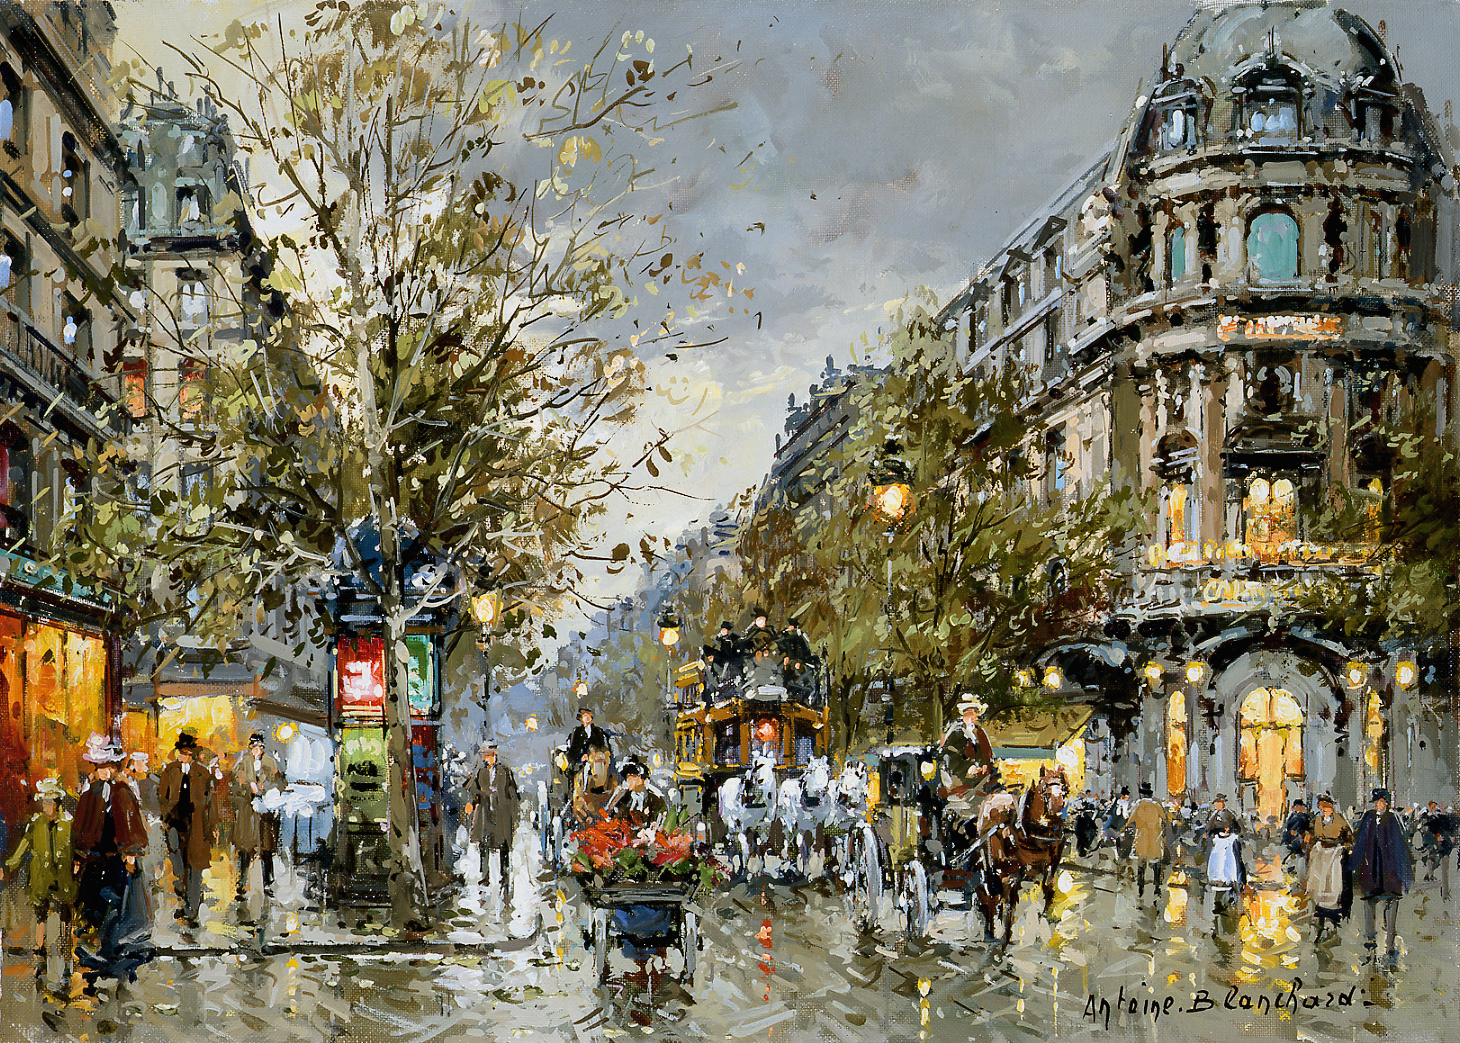 painting of the vaudville theater in paris